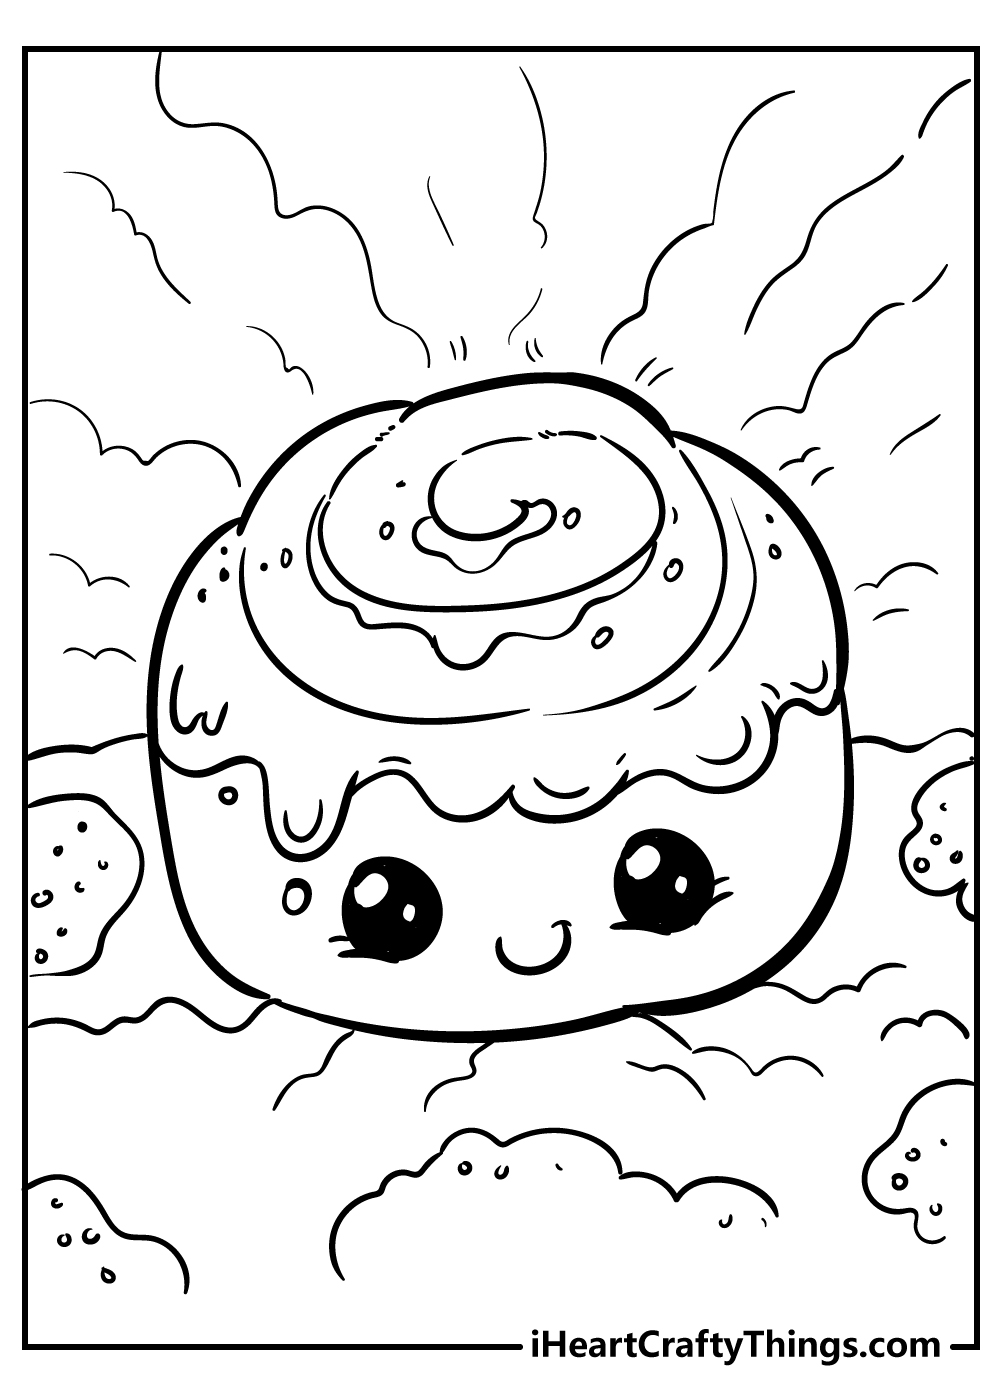 Kawaii Coloring Pages Updated 2021